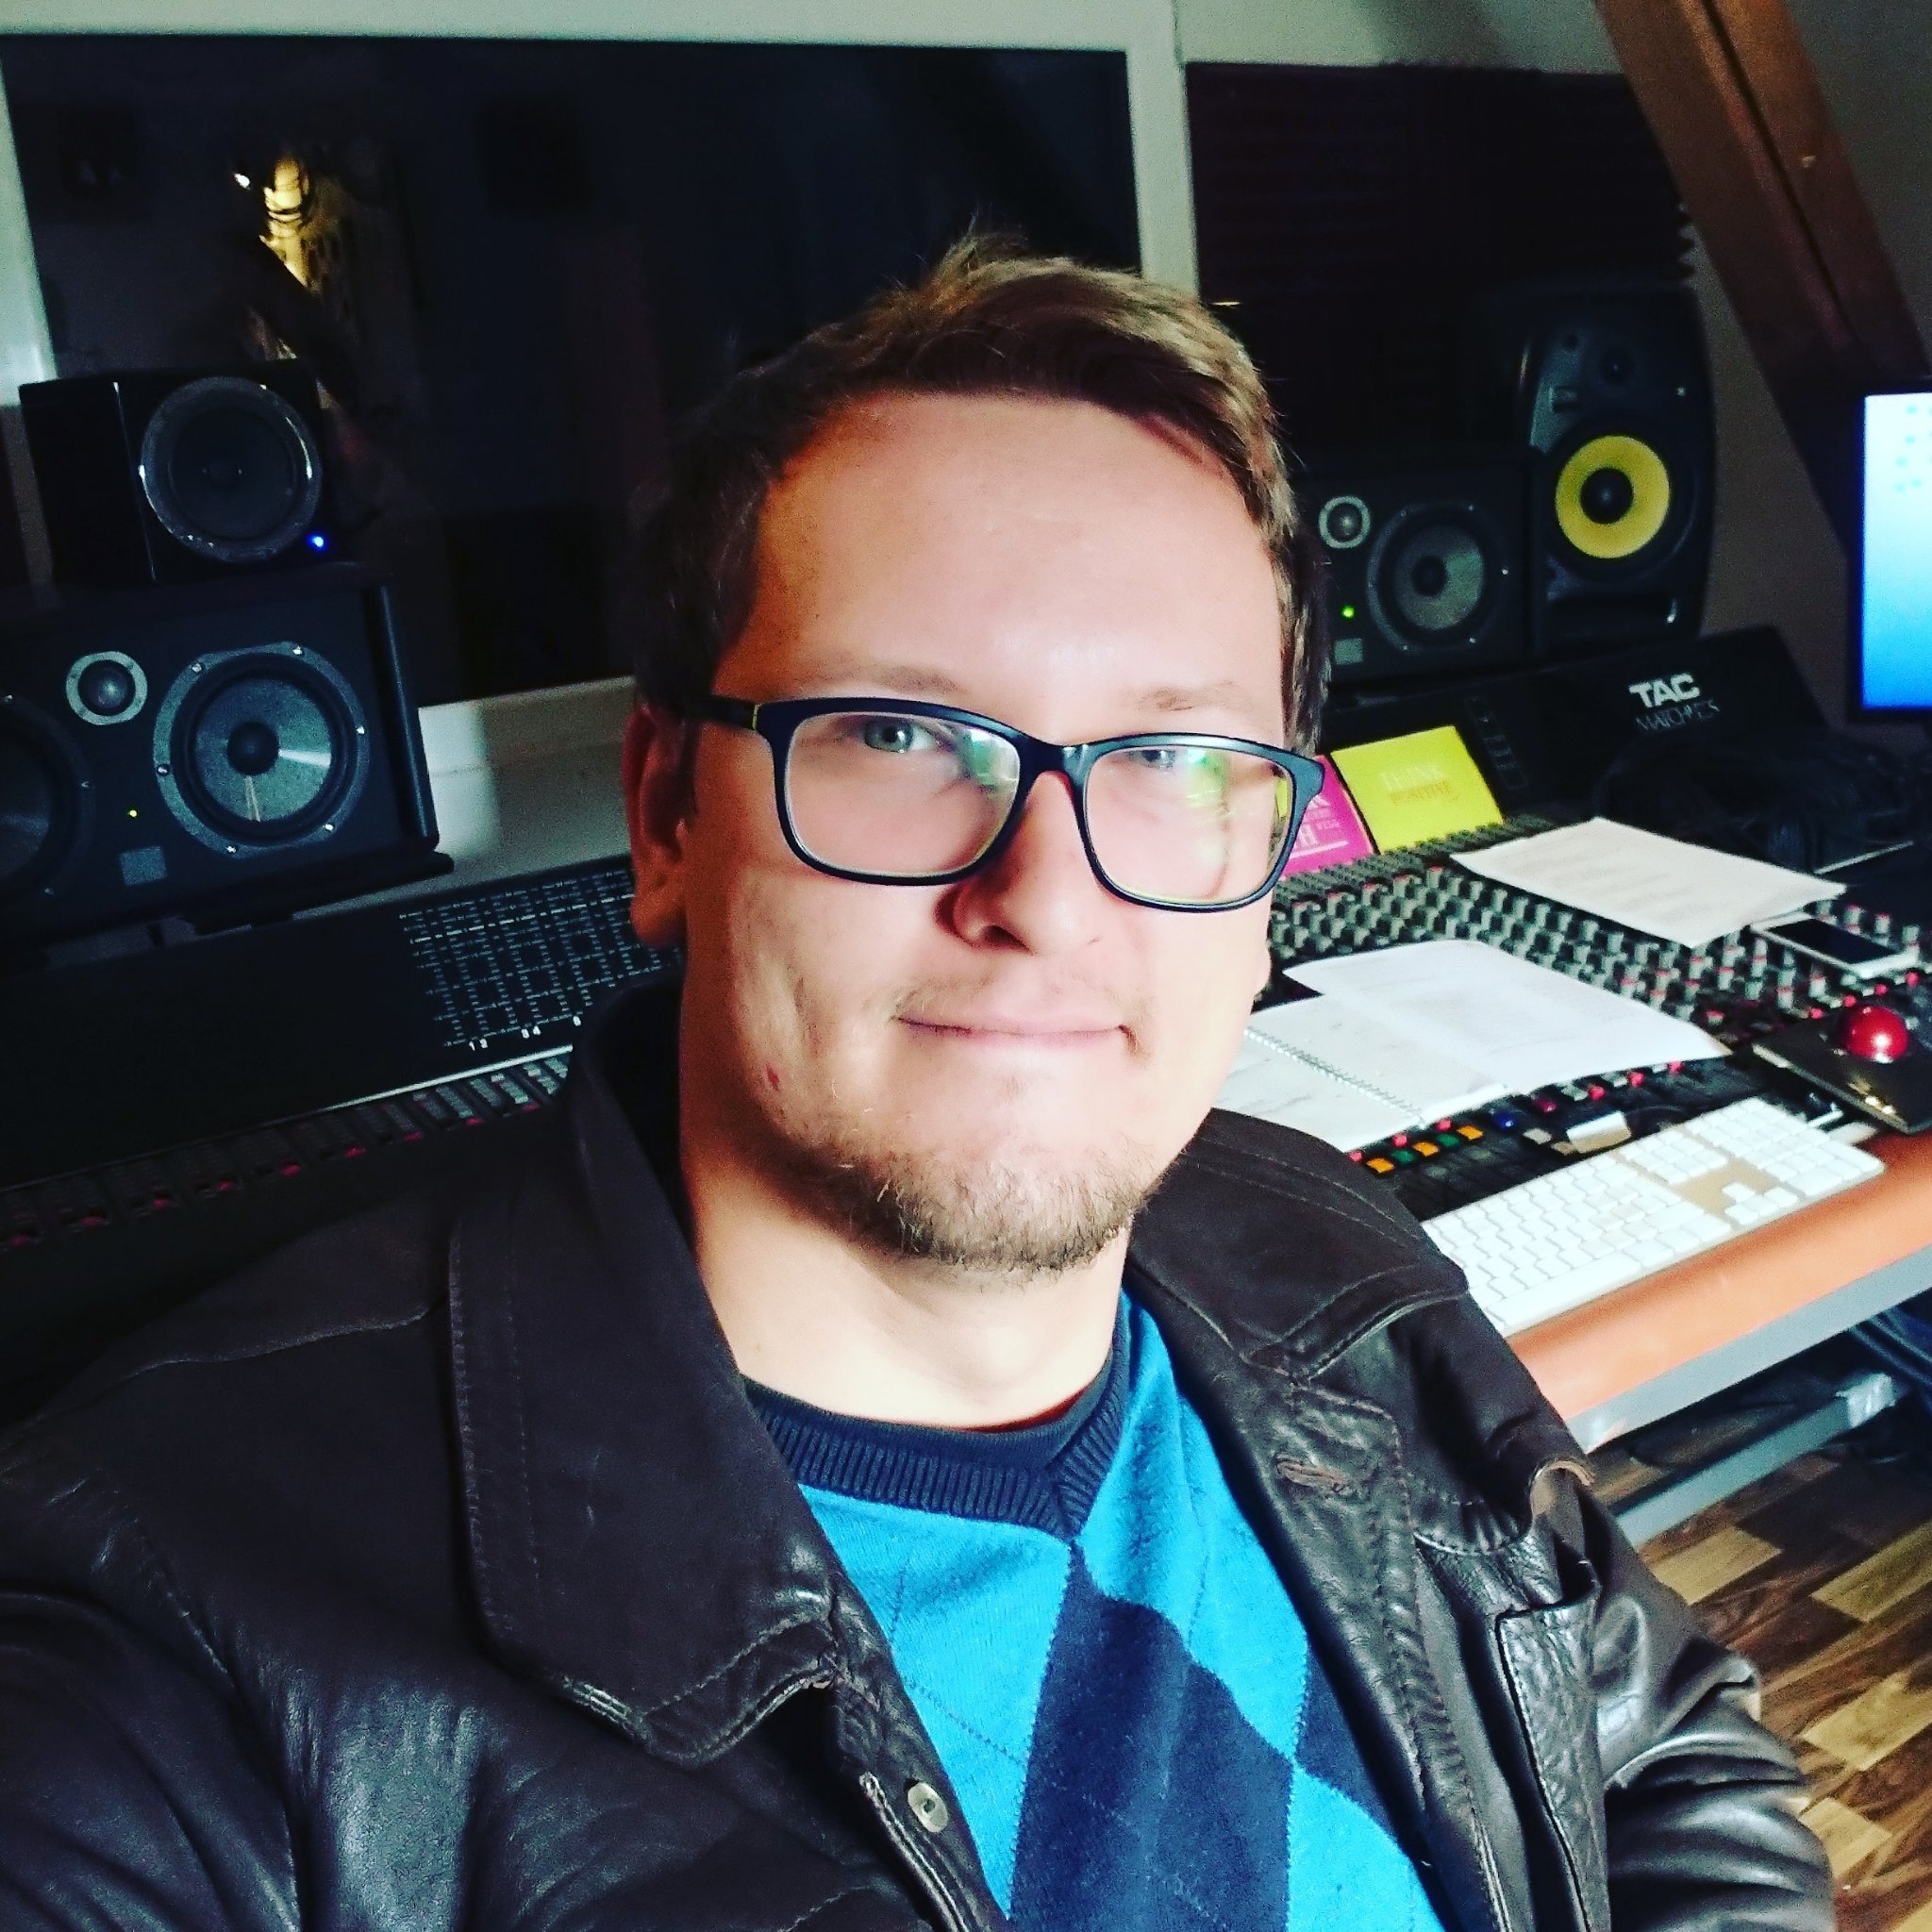 Music composer  🎶 musician and drummer. Auszubildend Audio Engineer diploma in #MARBURGRECORDS 
#musiccomposer #orchestra #synthwave #postrock #filmusic